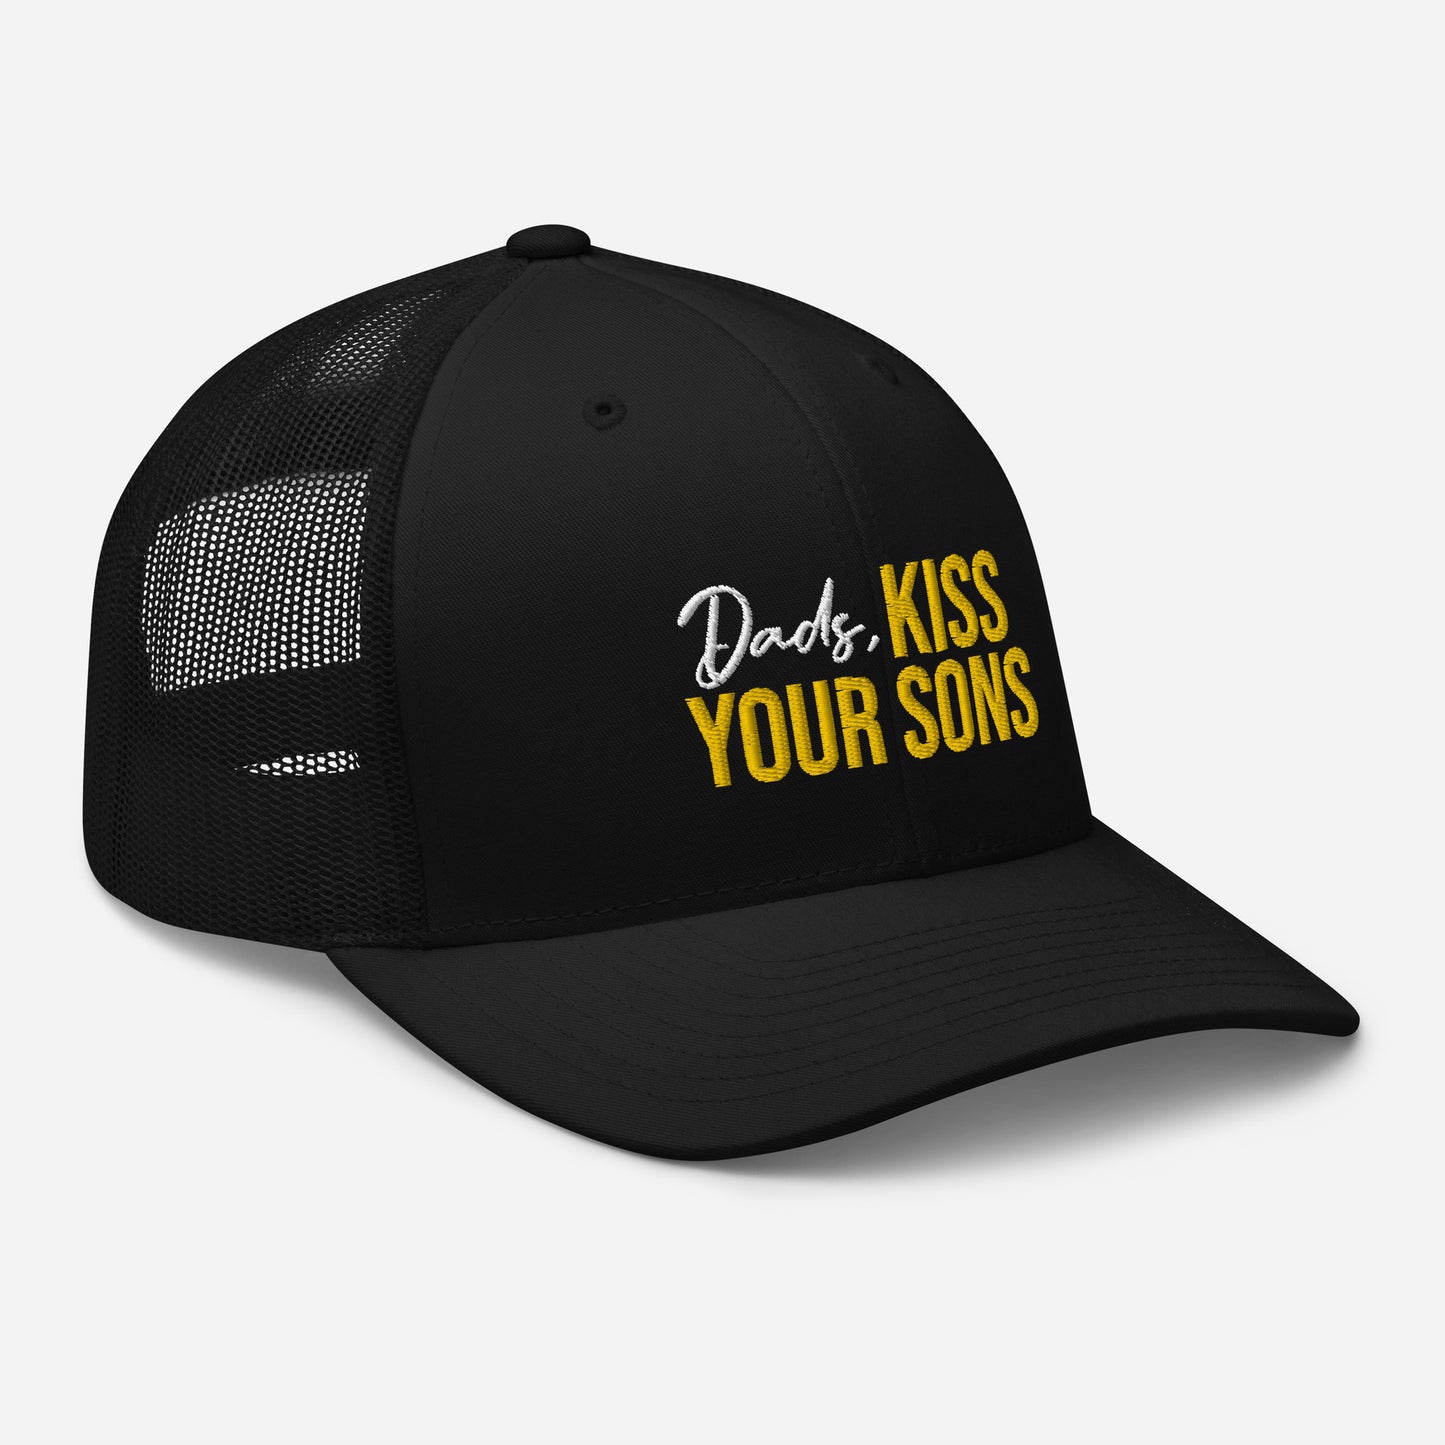 Dads, Kiss Your Sons Trucker Cap